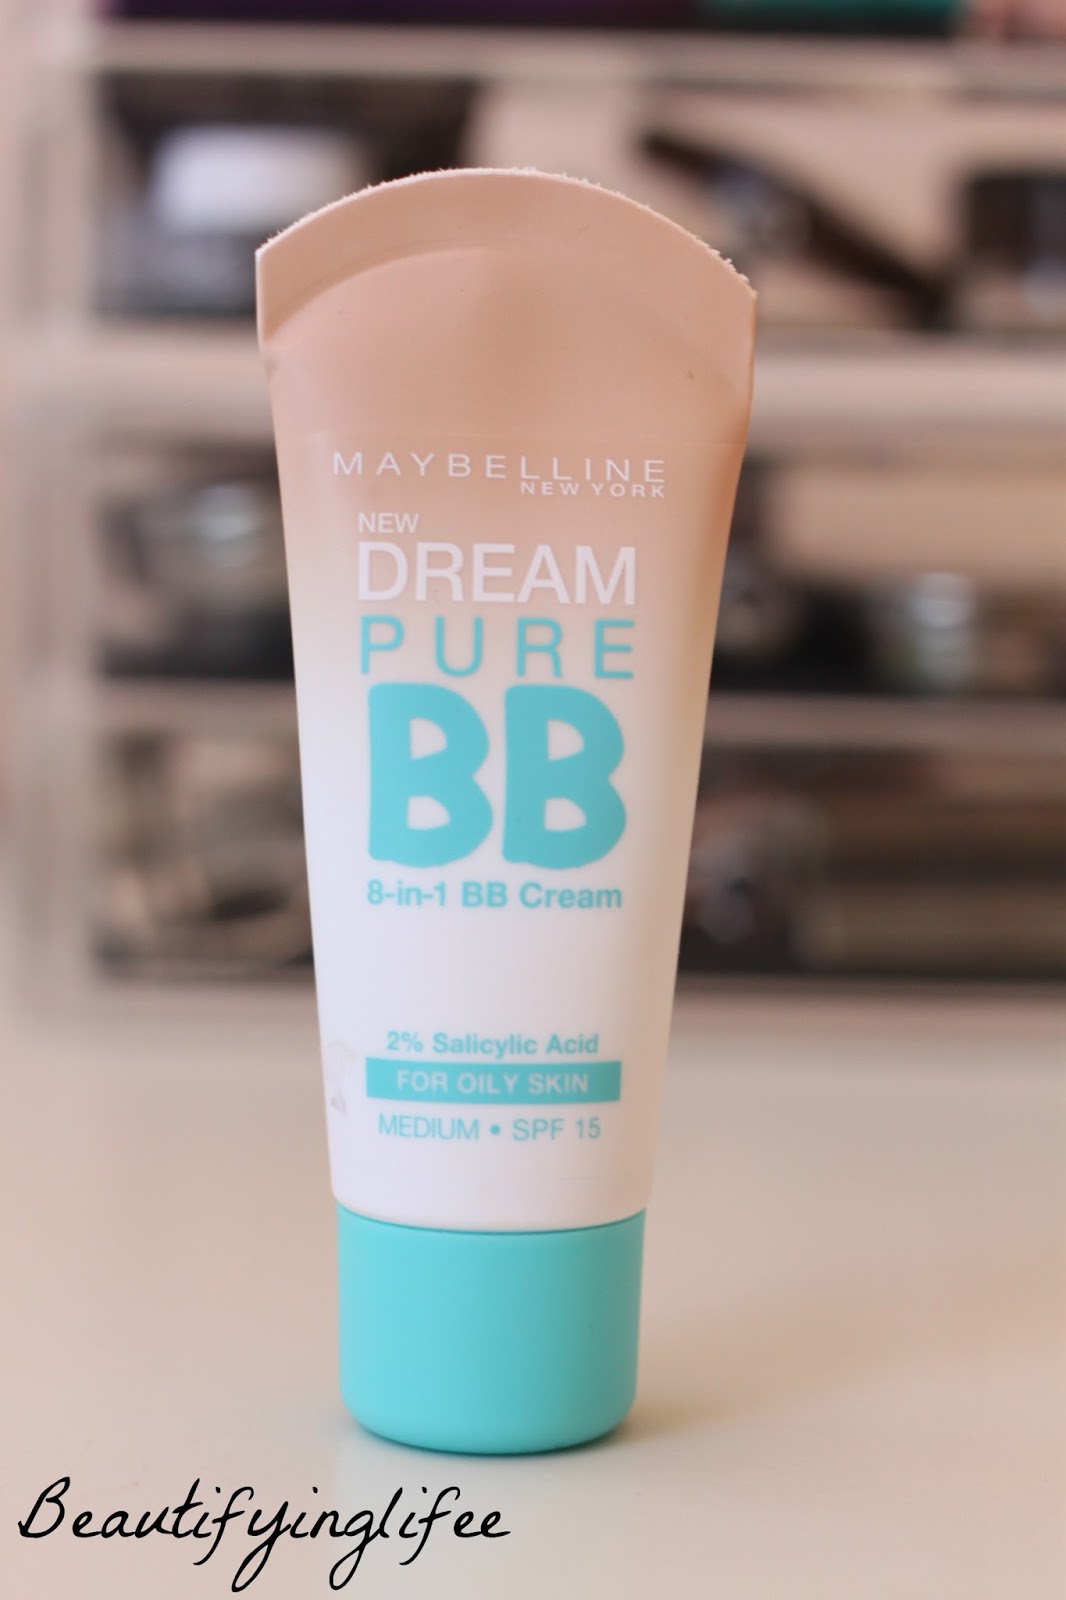 Orphan pistol Anmelder Review] Maybelline Dream Pure BB Cream in Medium ♥ - ♥ Beautifying Life ♥